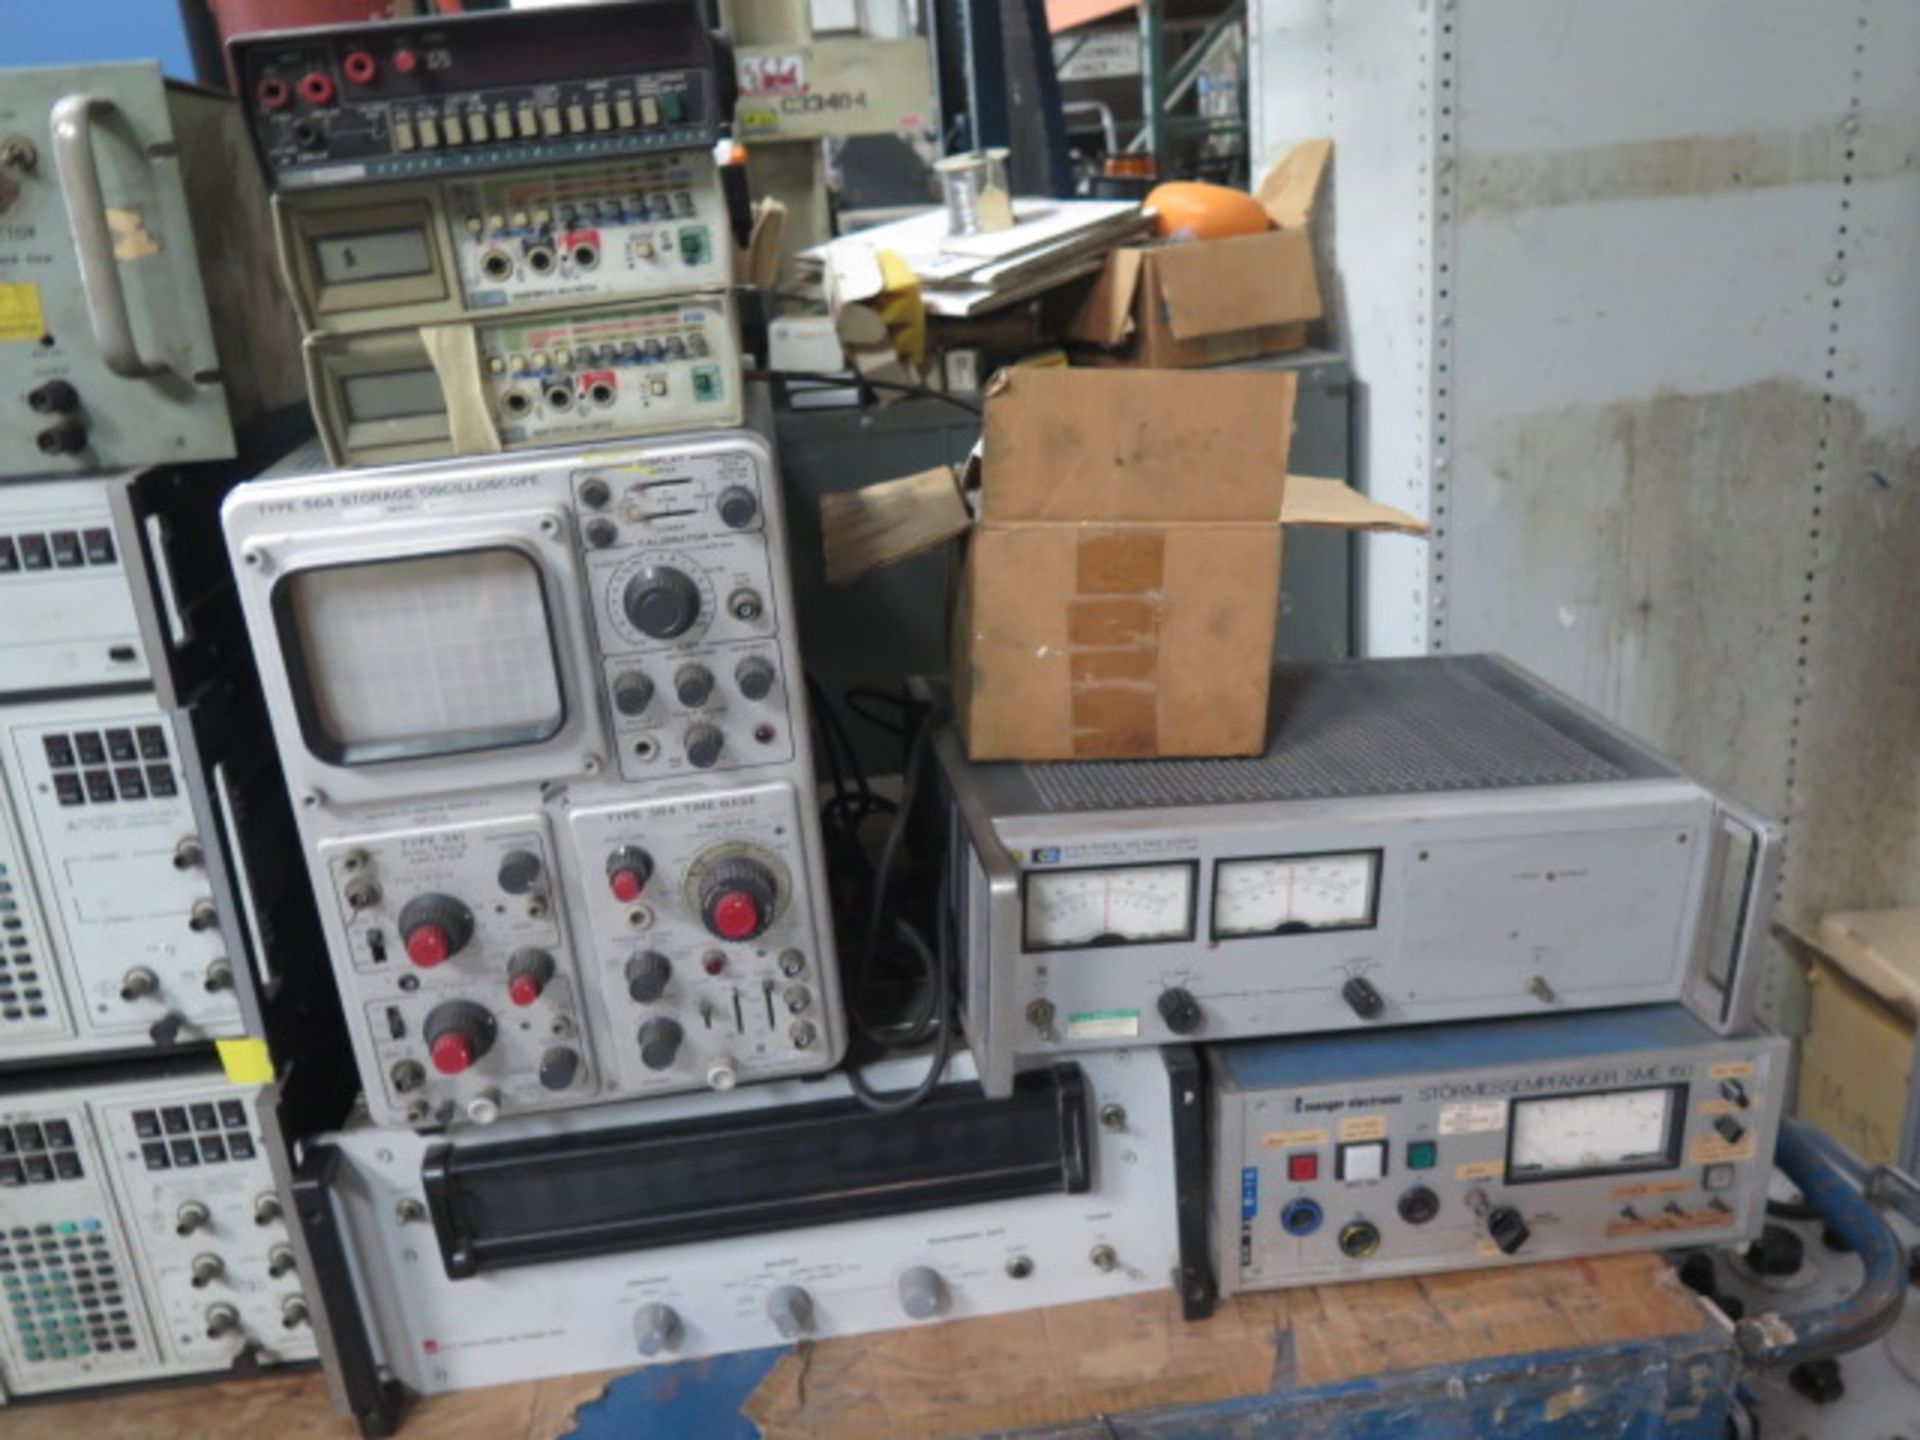 Electrical Test Equipment - Meters and Power Supplies (SOLD AS-IS - NO WARRANTY) - Image 3 of 5